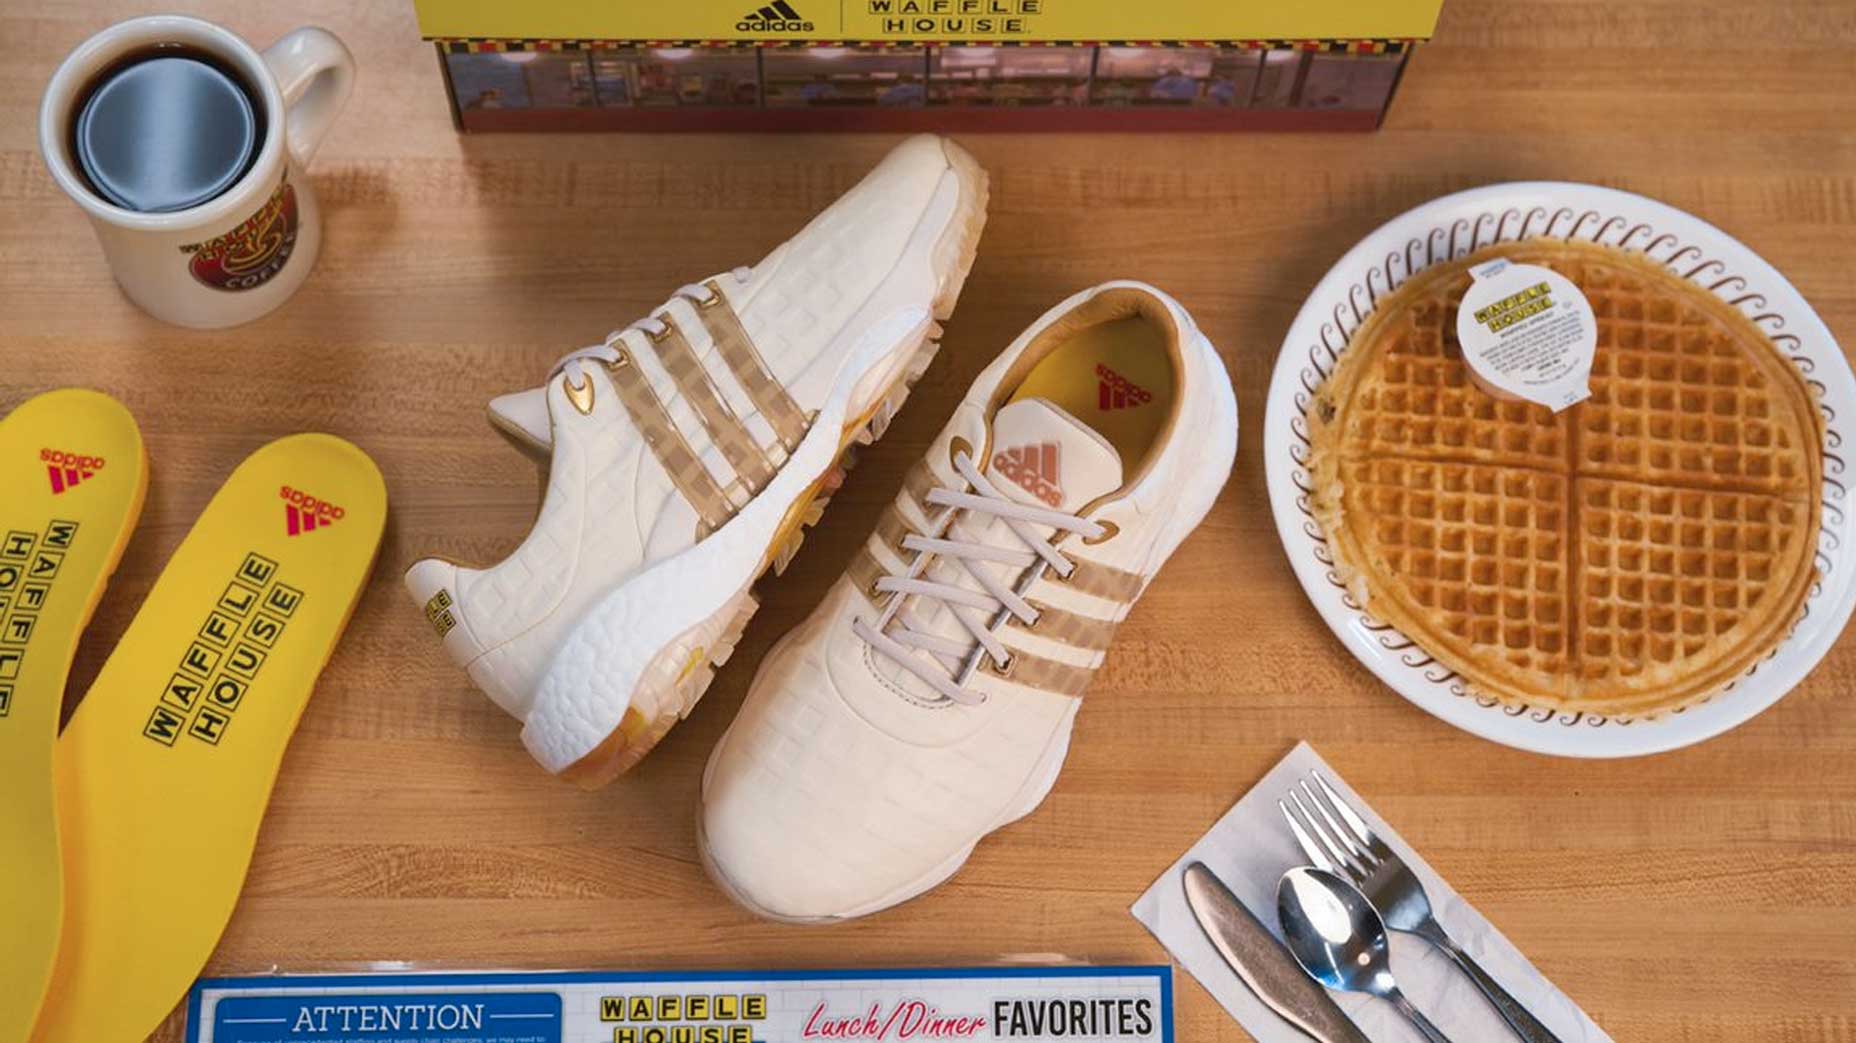 Adidas and Waffle House join forces to cook up limited-edition golf shoe